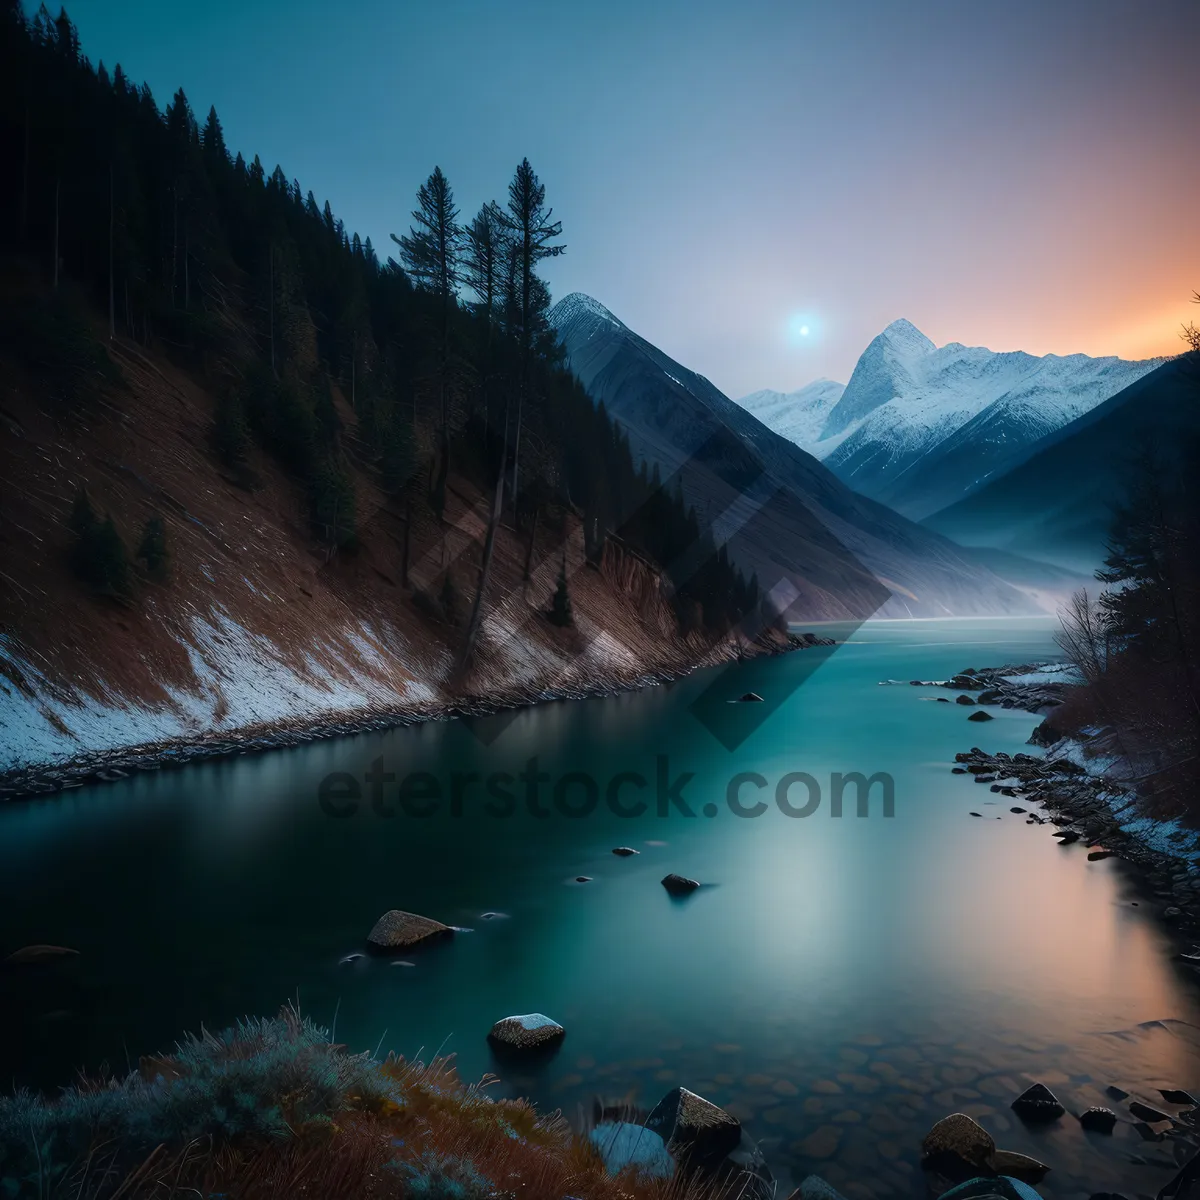 Picture of Serene Mountain Lake Reflection with Snow-Capped Peaks